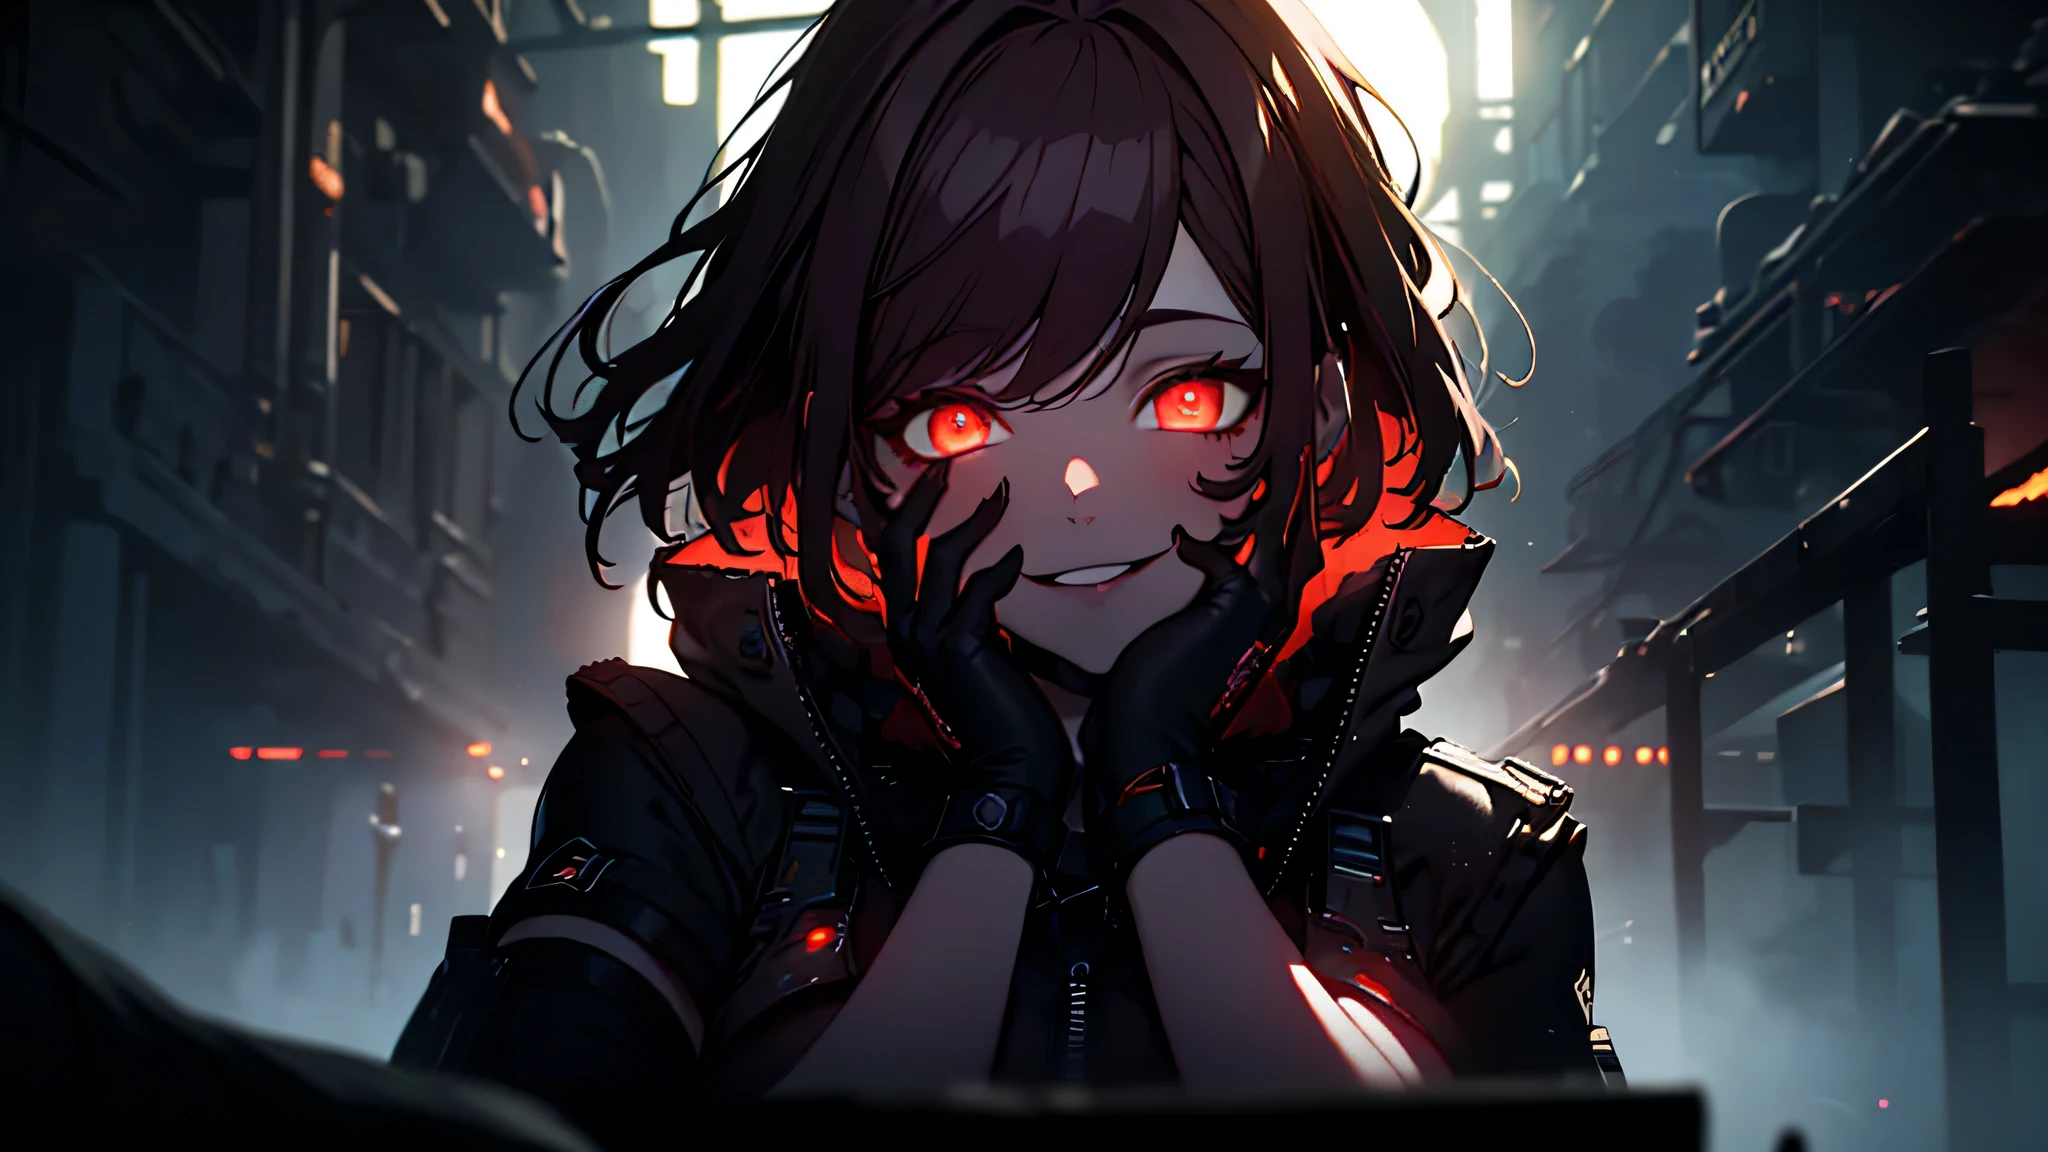 ((Best quality)), ((masterpiece)), (detailed:1.4), 3D, an image of a beautiful cyberpunk female, Yandere , Yandere Face , Trance , Trance Eyes , yameroyandere , constricted pupils , yandere ,
empty eyes . shaded face , crazy eyes , glowing eyes , crazy smile , dark, long burning red hair, burning hair, light brown eyes, red Barret, Black Soldier Shirt, Black under cloth, black panty, Grenade belt, Big chest, Big thigh, High thigh black knee sock, full view of girl, battlefield background, black combat boot, red necktie, black glove, black combat suit, black jacket, black cloak, black panty, ammo belt, HDR (High Dynamic Range),Ray Tracing,NVIDIA RTX,Super-Resolution,Unreal 5,Subsurface scattering,PBR Texturing,Post-processing,Anisotropic Filtering,Depth-of-field,Maximum clarity and sharpness,Multi-layered textures,Albedo and Specular maps,Surface shading,Accurate simulation of light-material interaction,Perfect proportions,Octane Render,Two-tone lighting,Wide aperture,Low ISO,White balance,Rule of thirds,8K RAW,